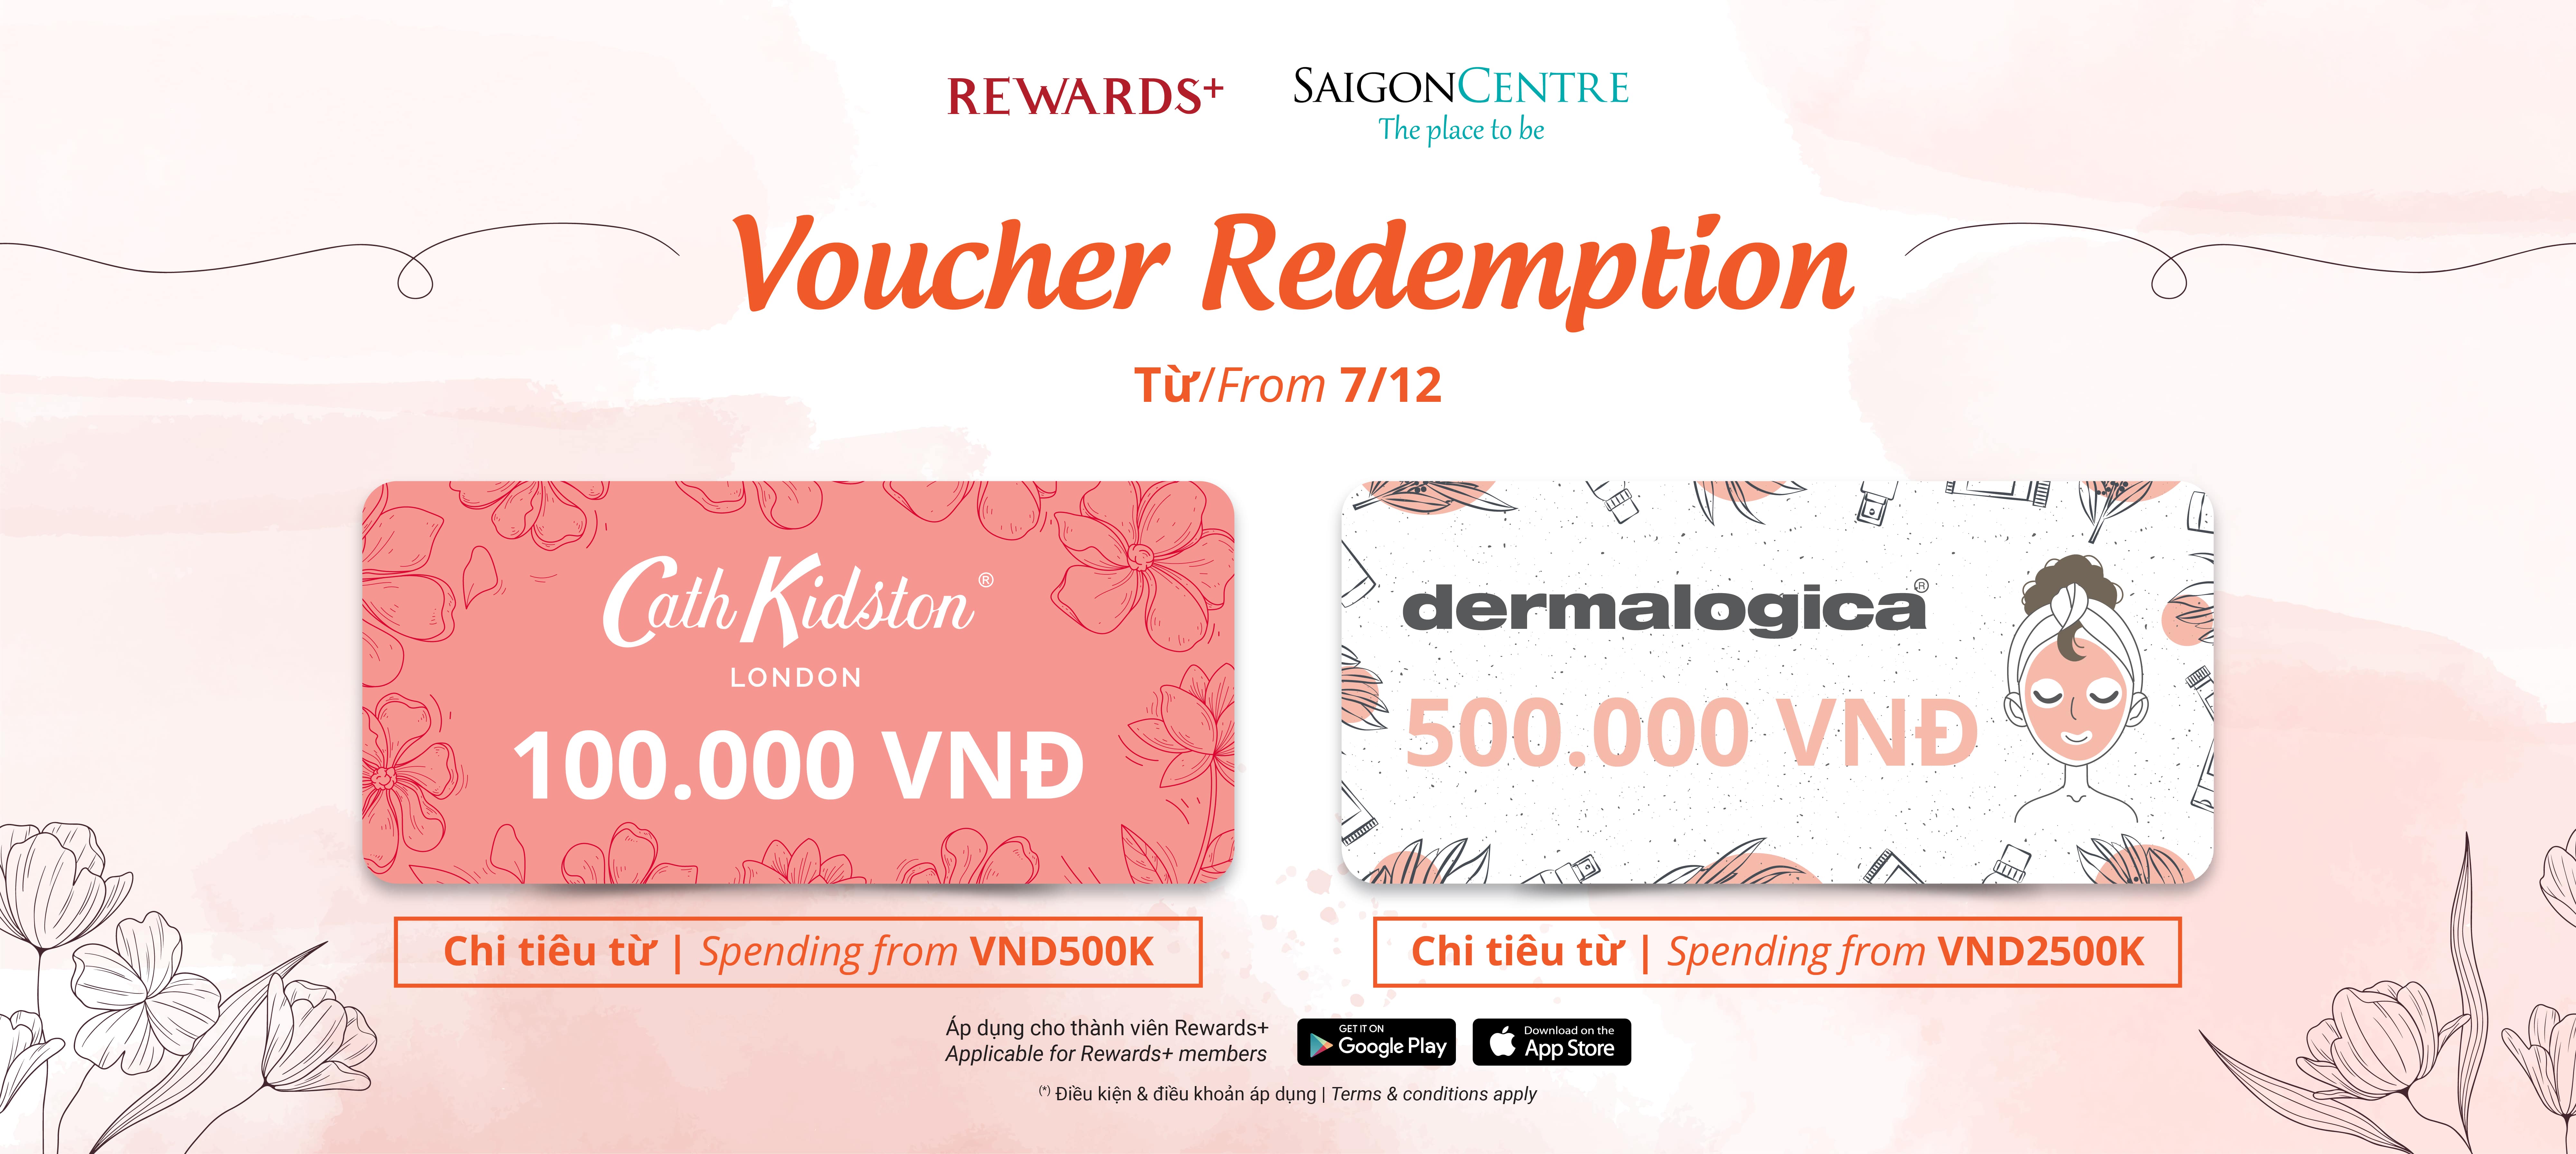 VOUCHER REDEMPTION WITH SPENDING FROM VND500K